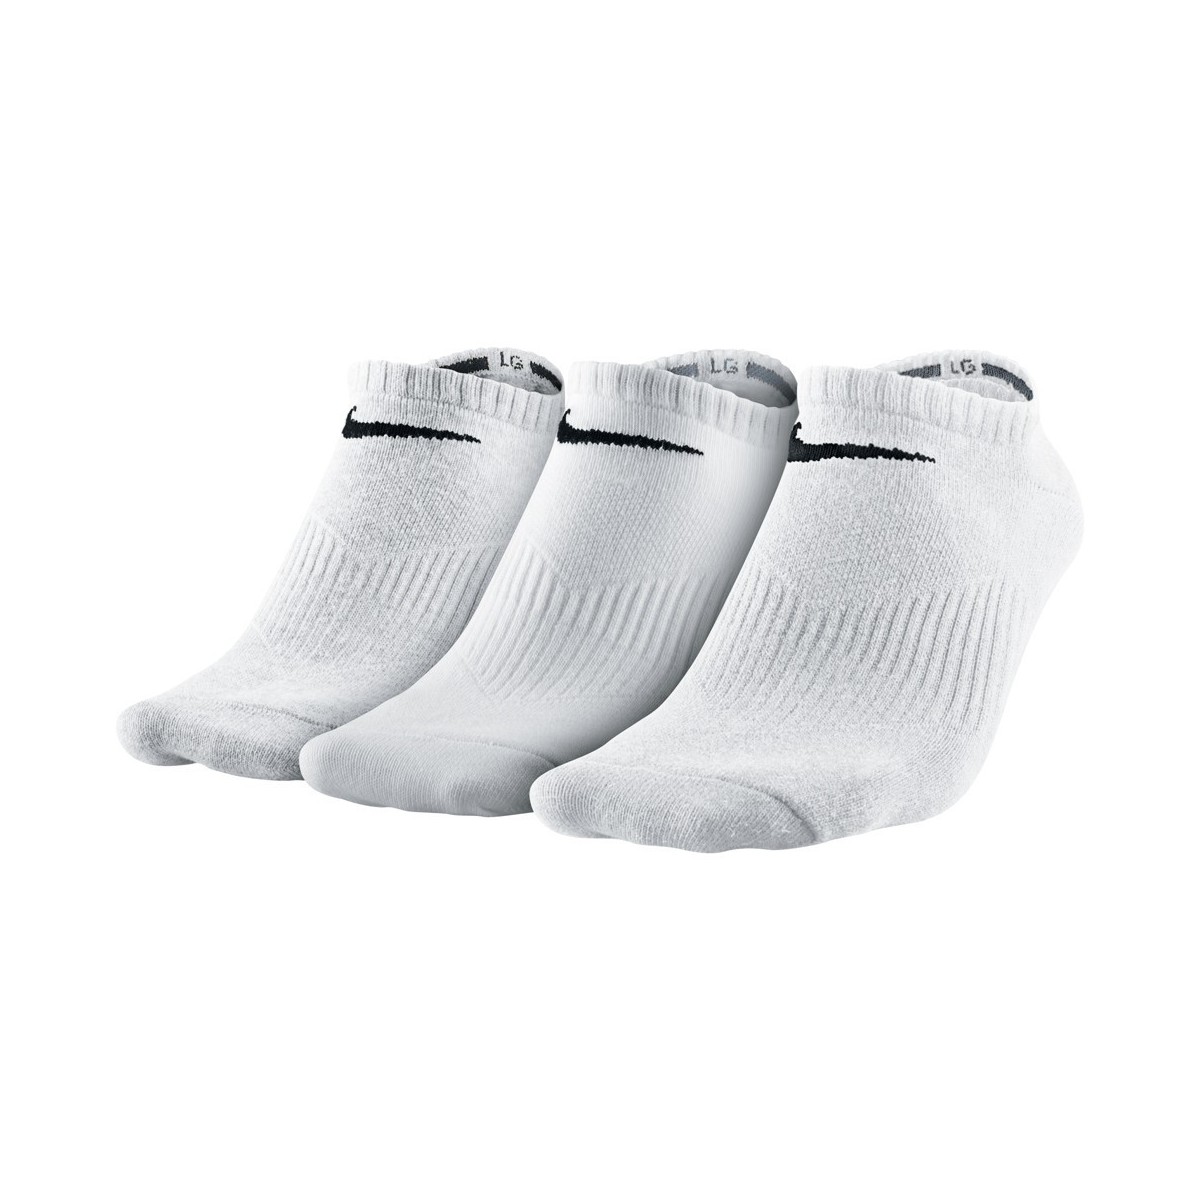  Junior Lightweight Nike No-Show X3 Paires - Blanches